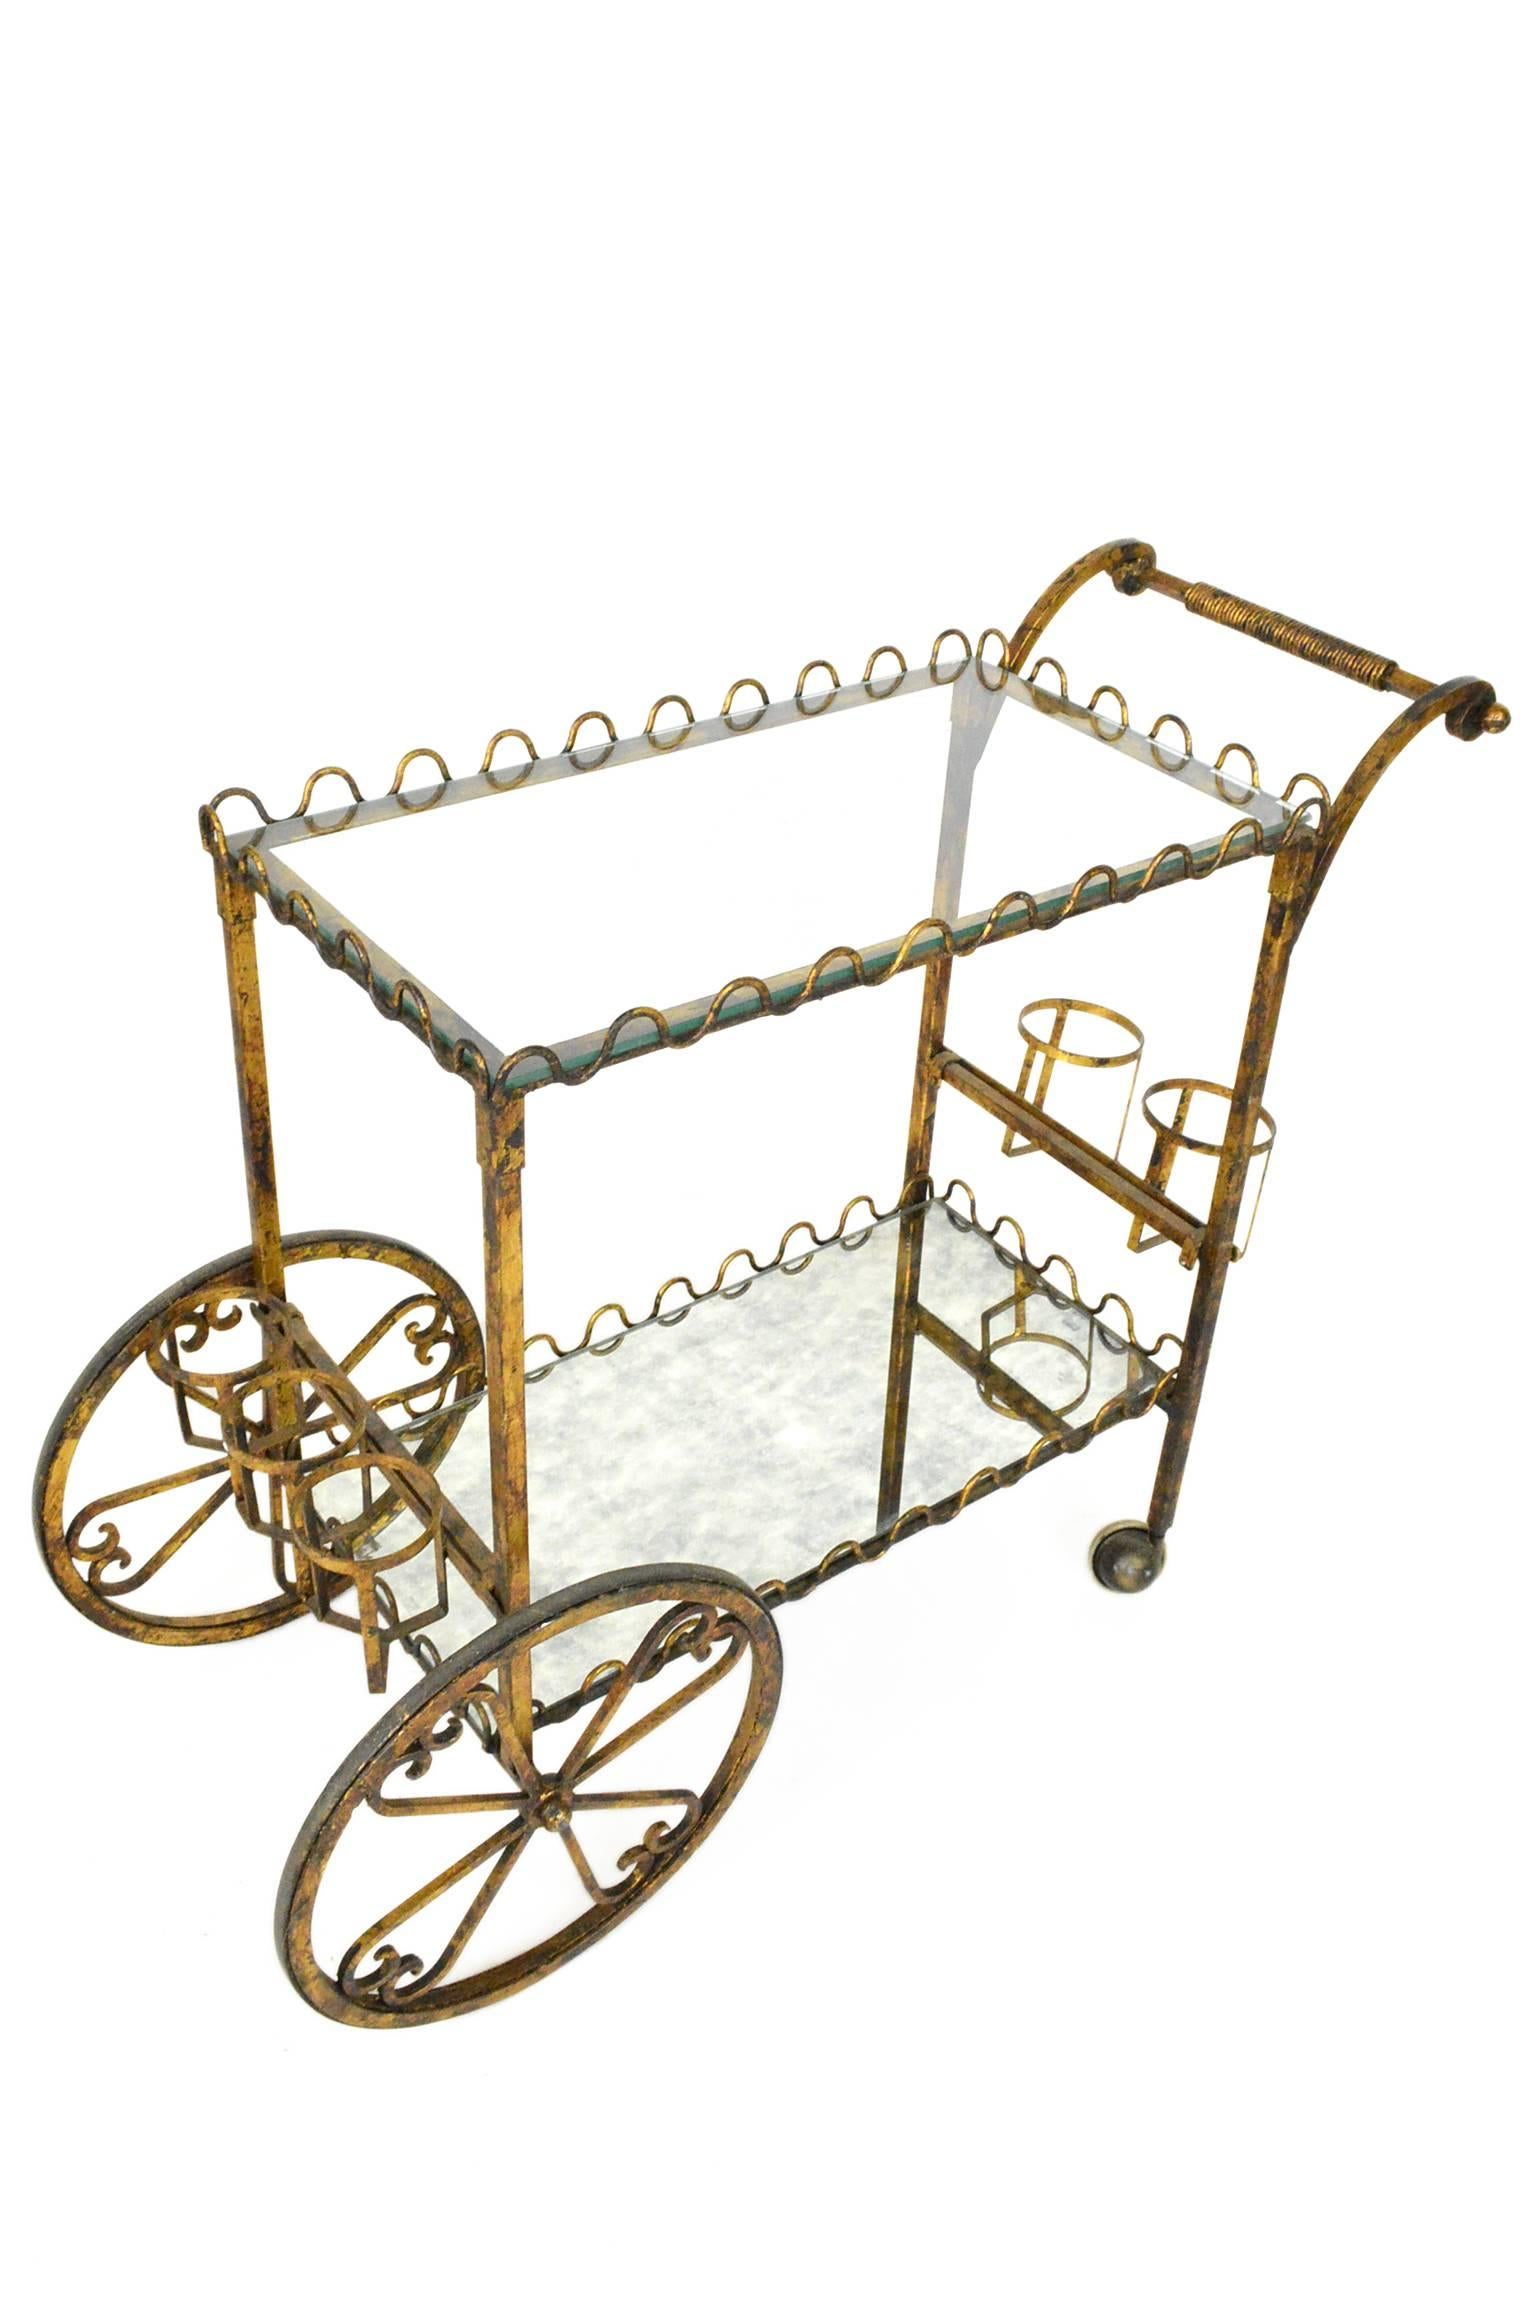 Mid-Century gilt iron bar cart or tea cart, having a great form with loop decoration at its top and bottom; maintaining original patina throughout.